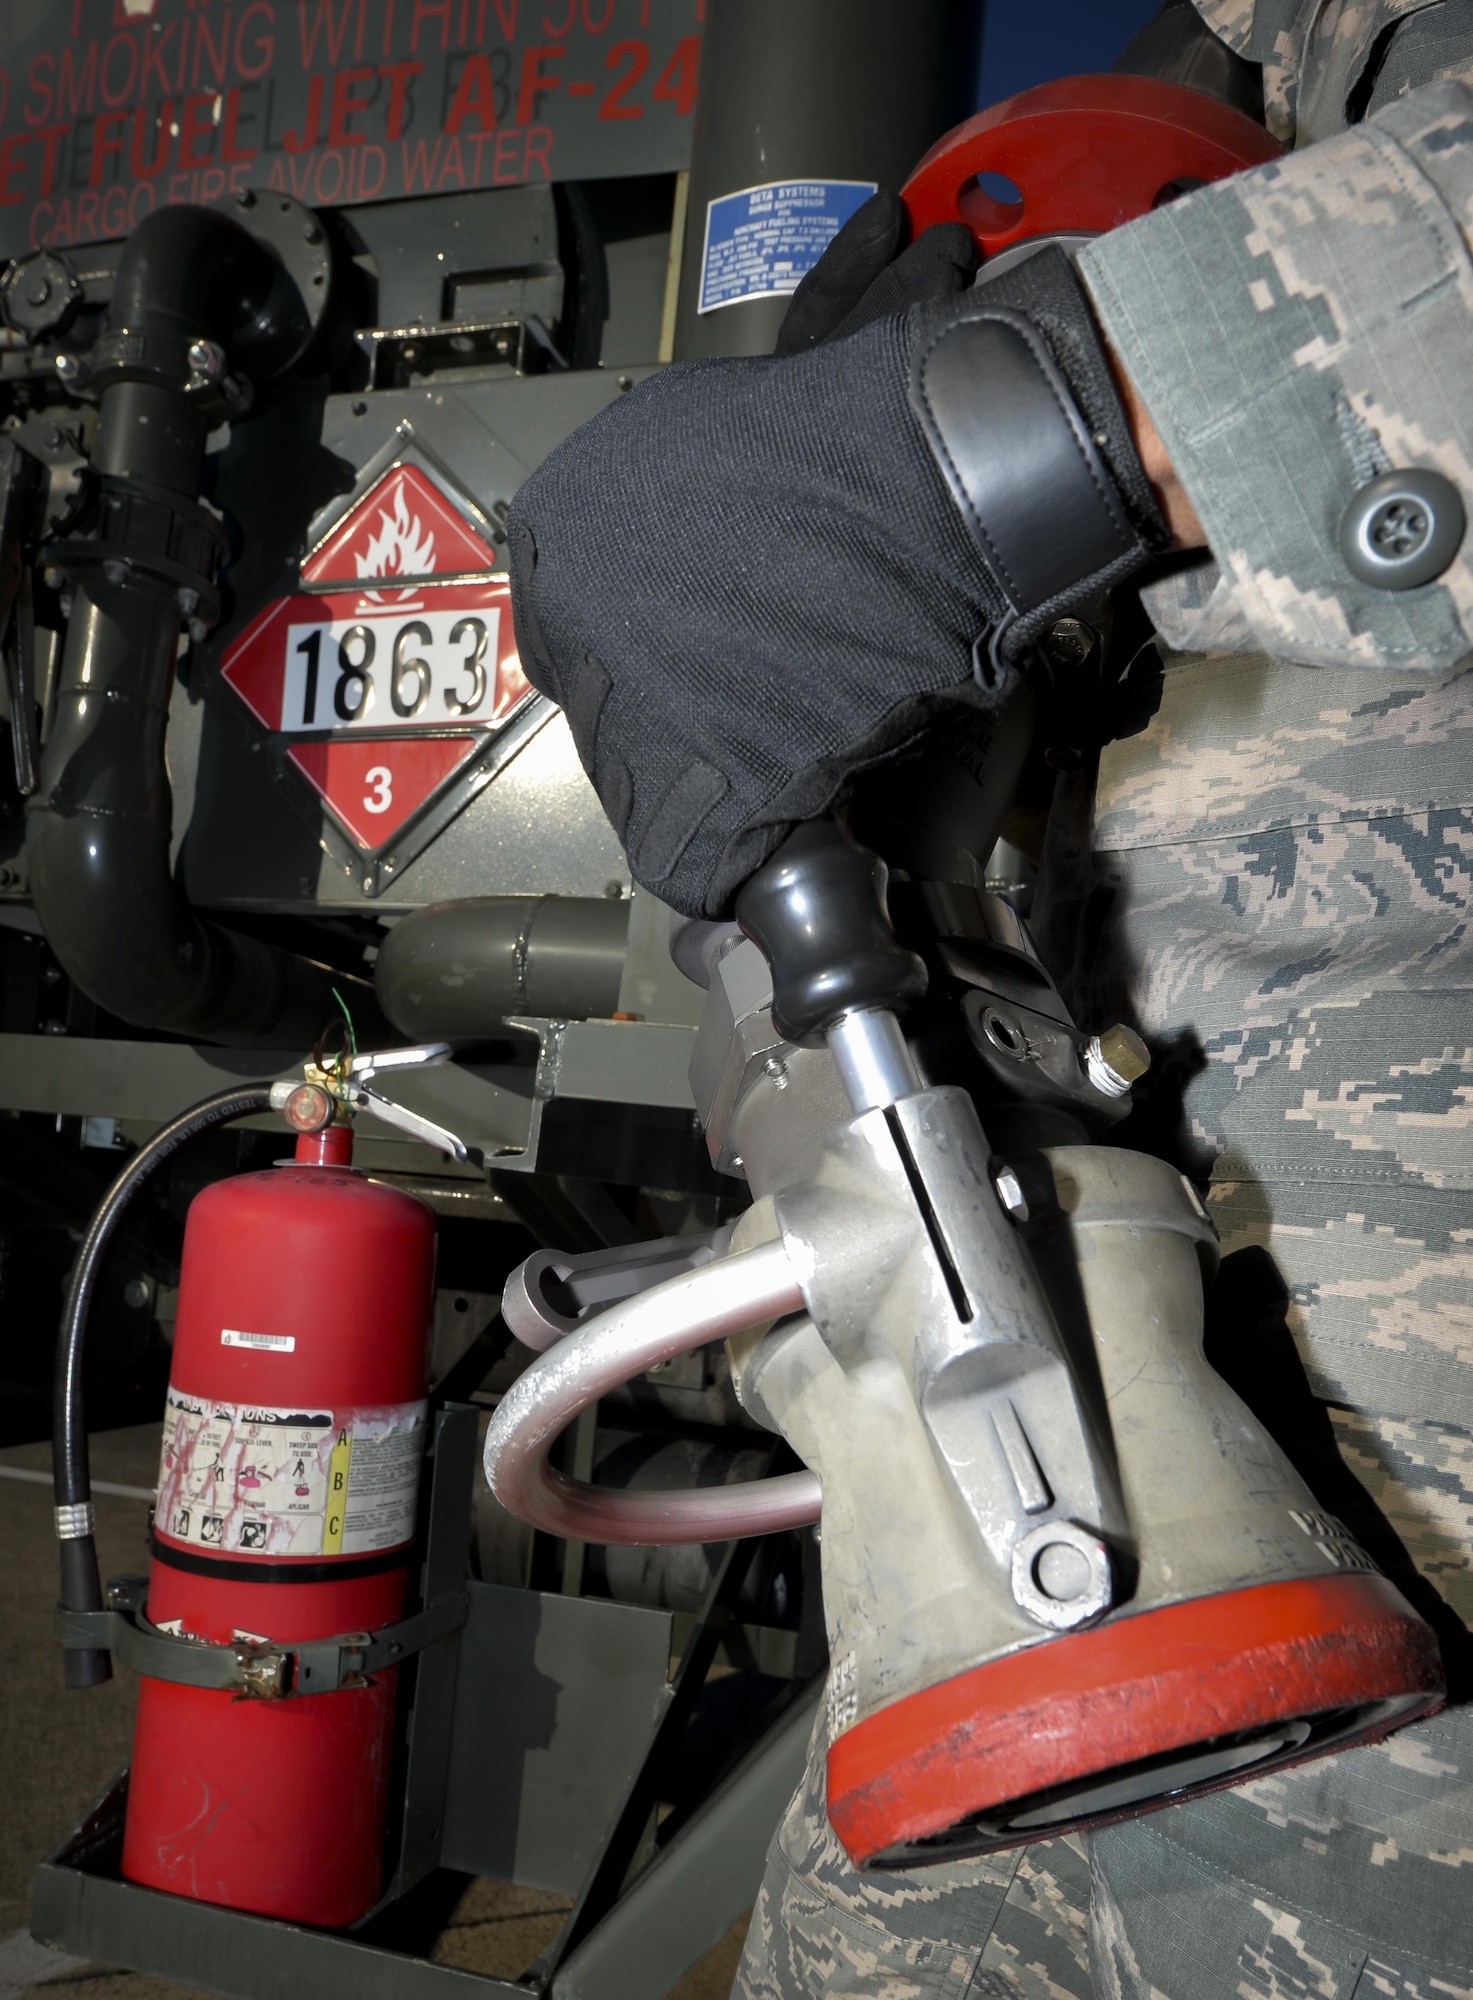 Airman 1st Class Ivan Saldivar, 2nd Logistics Readiness Squadron fuel distribution operator, holds a fuel nozzle from an R-12 hydrant servicing truck at Barksdale Air Force Base, La., Jan. 11, 2016. Fuel nozzles assist with delivering up to 600 gallons of fuel per minute to aircraft and emergency response vehicles. (U.S. Air Force photo/Airman 1st Class Mozer O. Da Cunha)